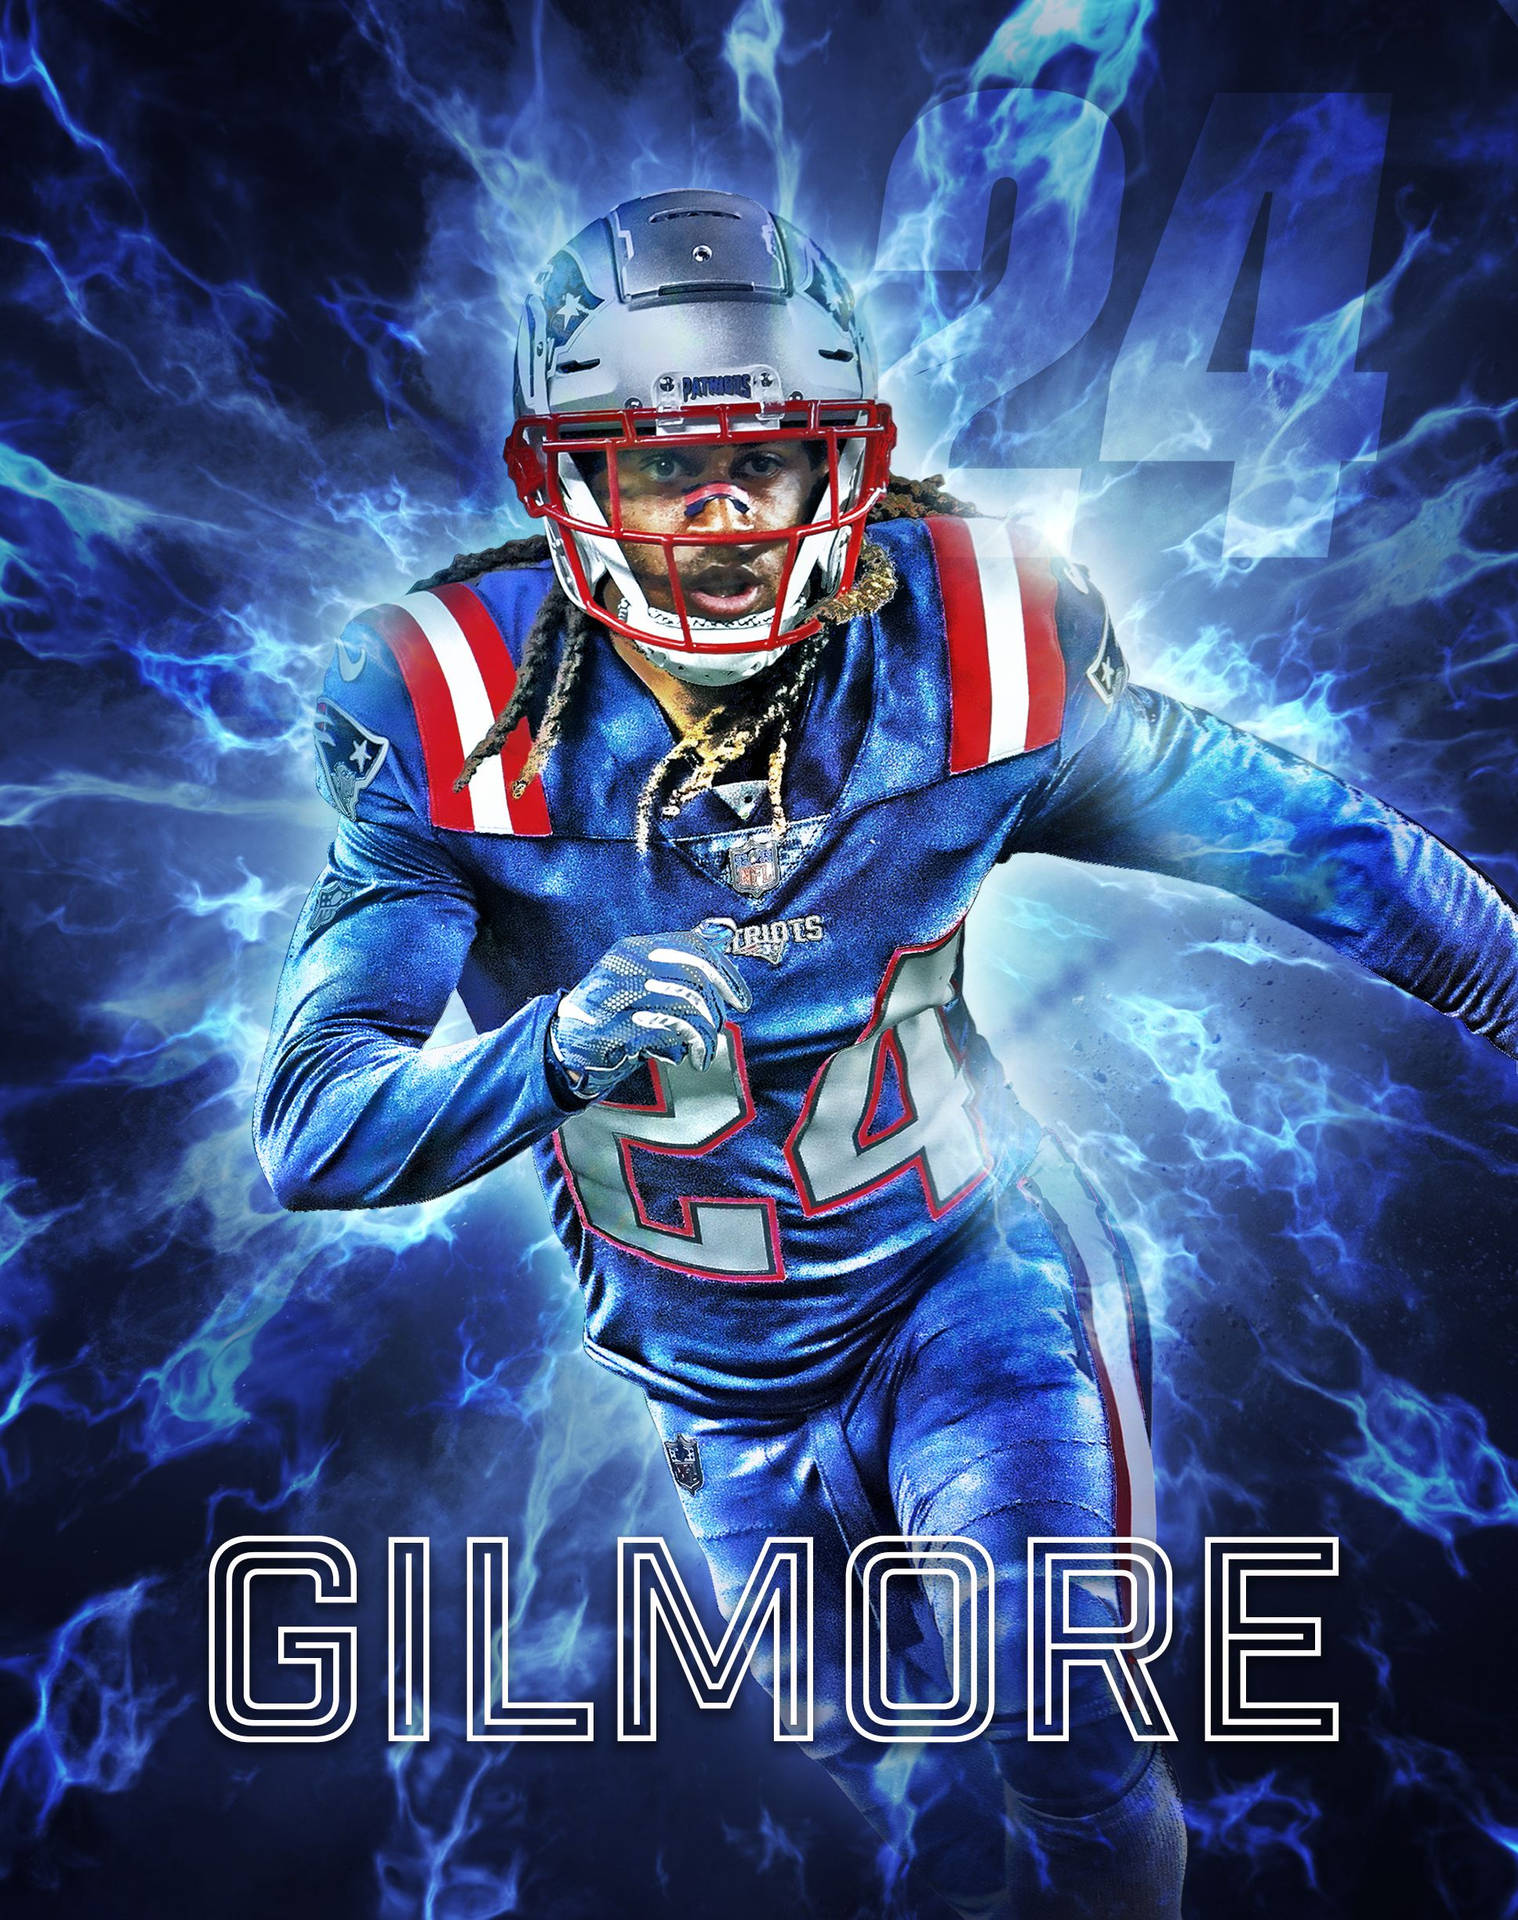 Stephon Gilmore NFL Players Wallpaper